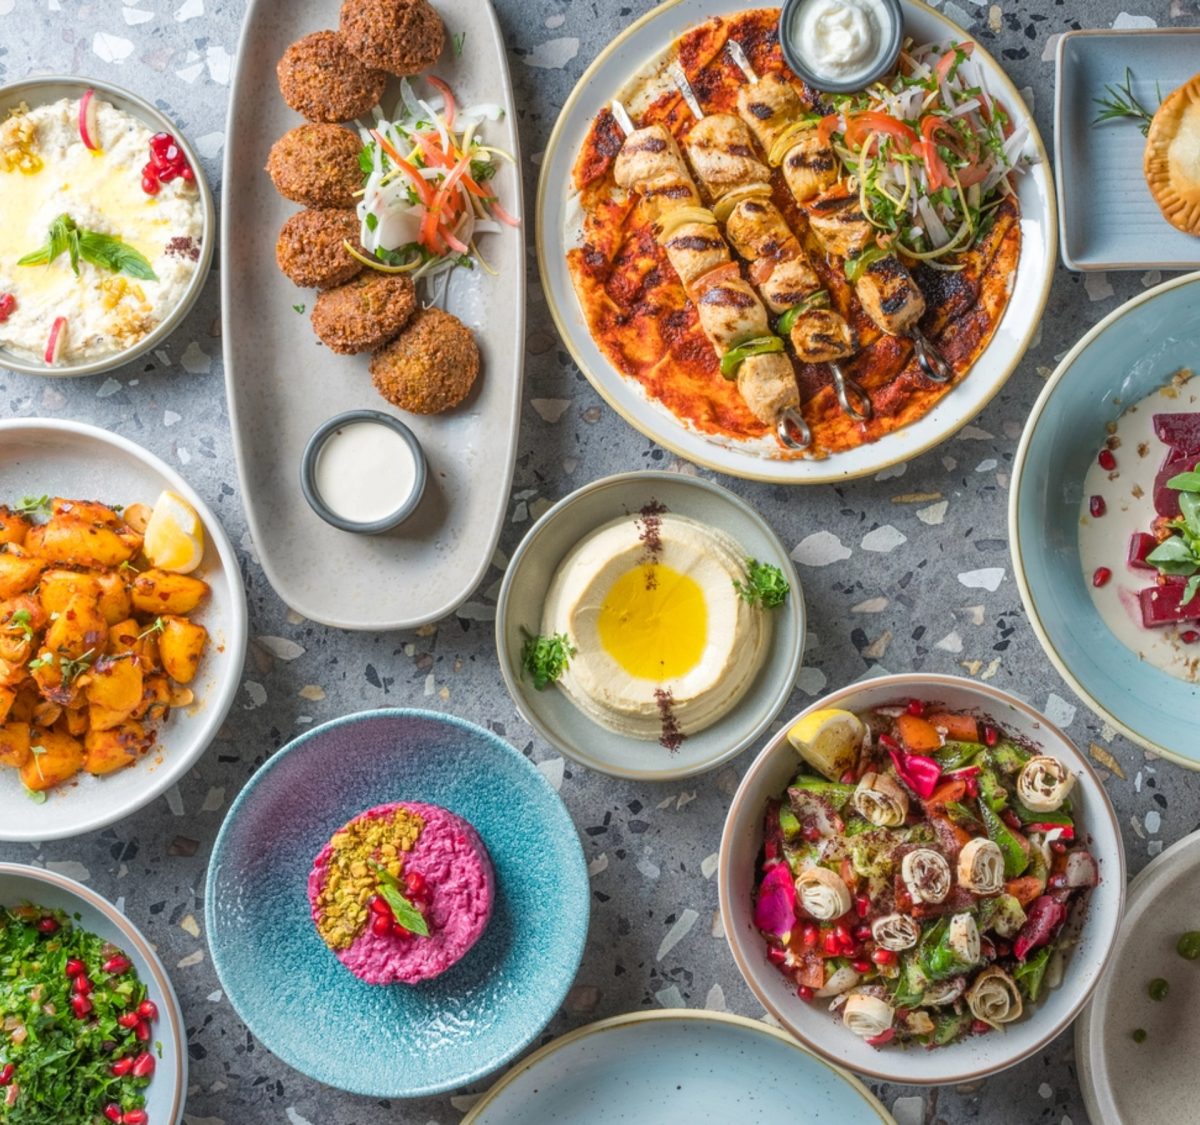 A table laden with middle eastern dishes like dips and meat skewers